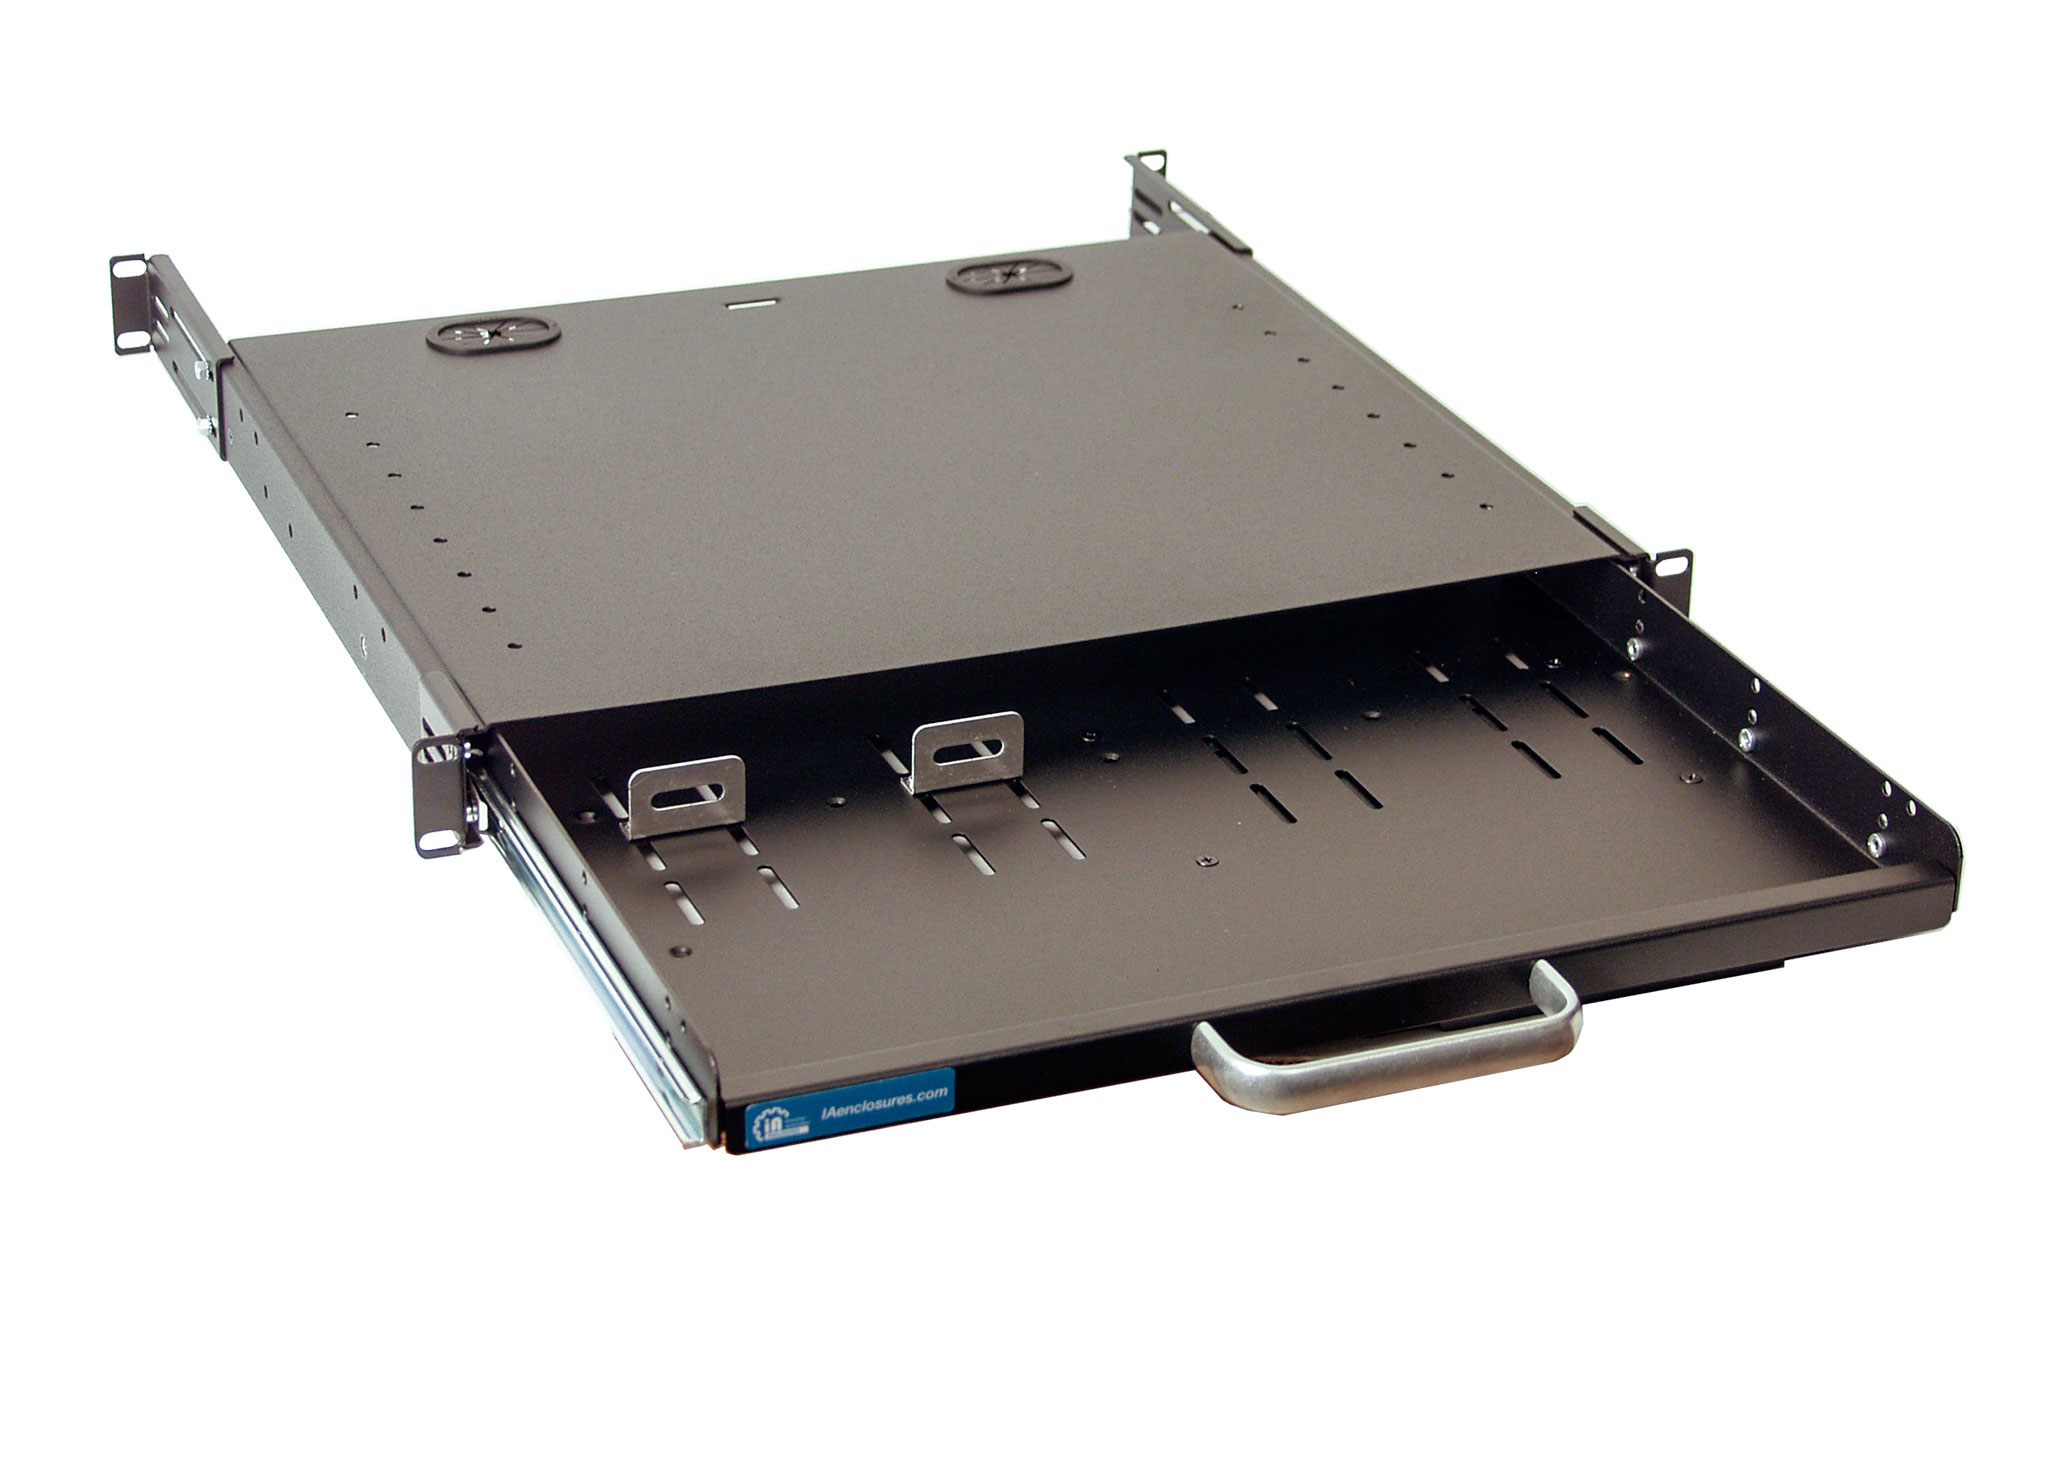 1U Compact Rackmount Keyboard Drawer with pull out mouse pad